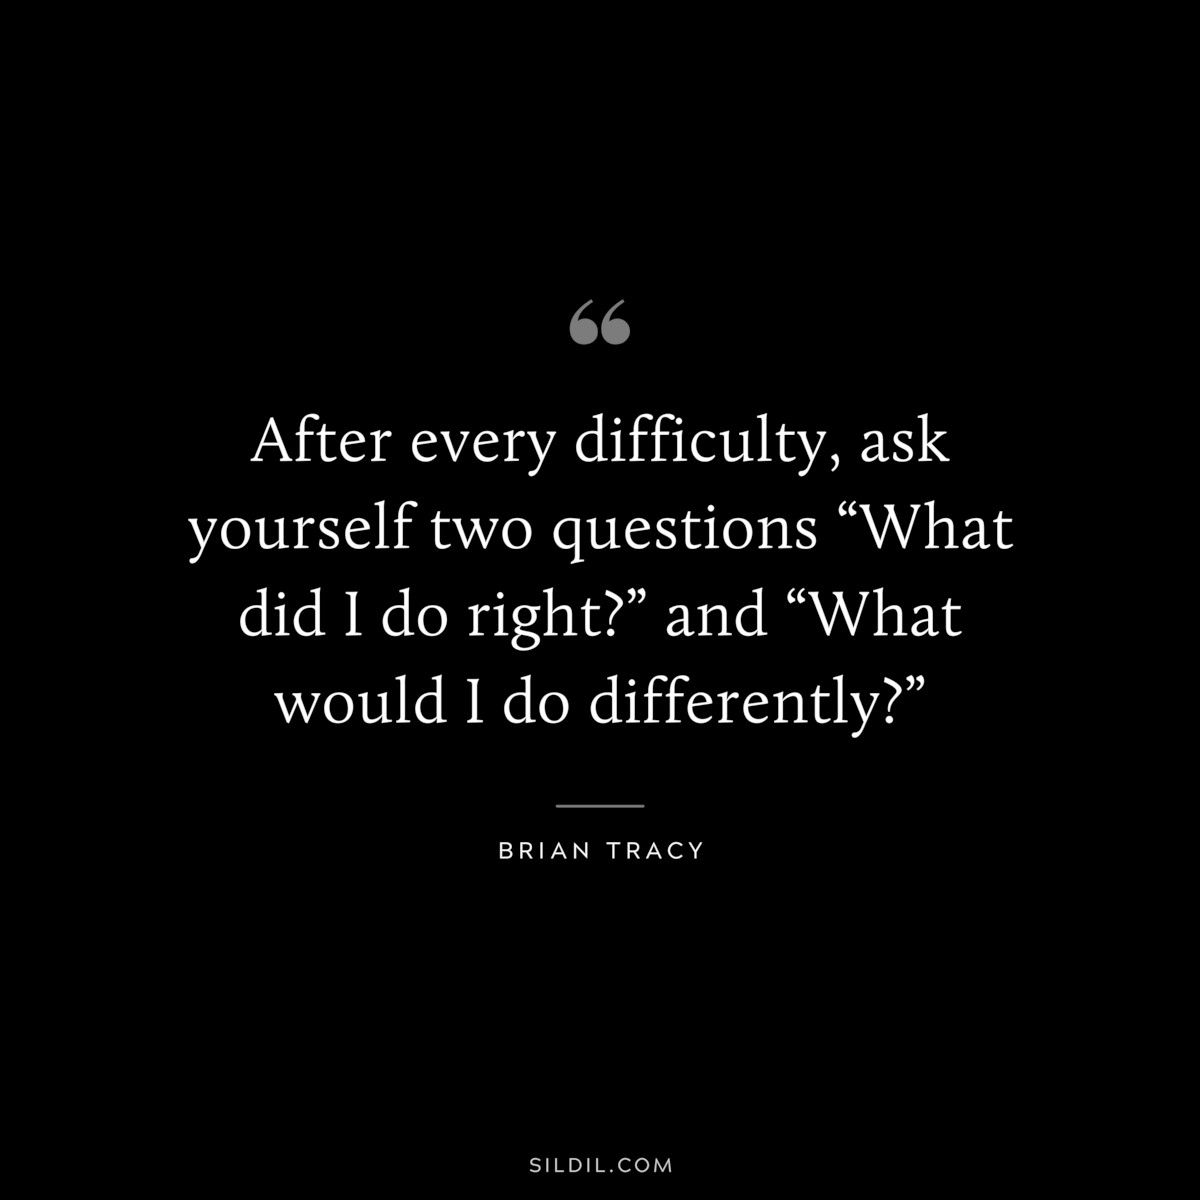 After every difficulty, ask yourself two questions “What did I do right?” and “What would I do differently?” ― Brian Tracy